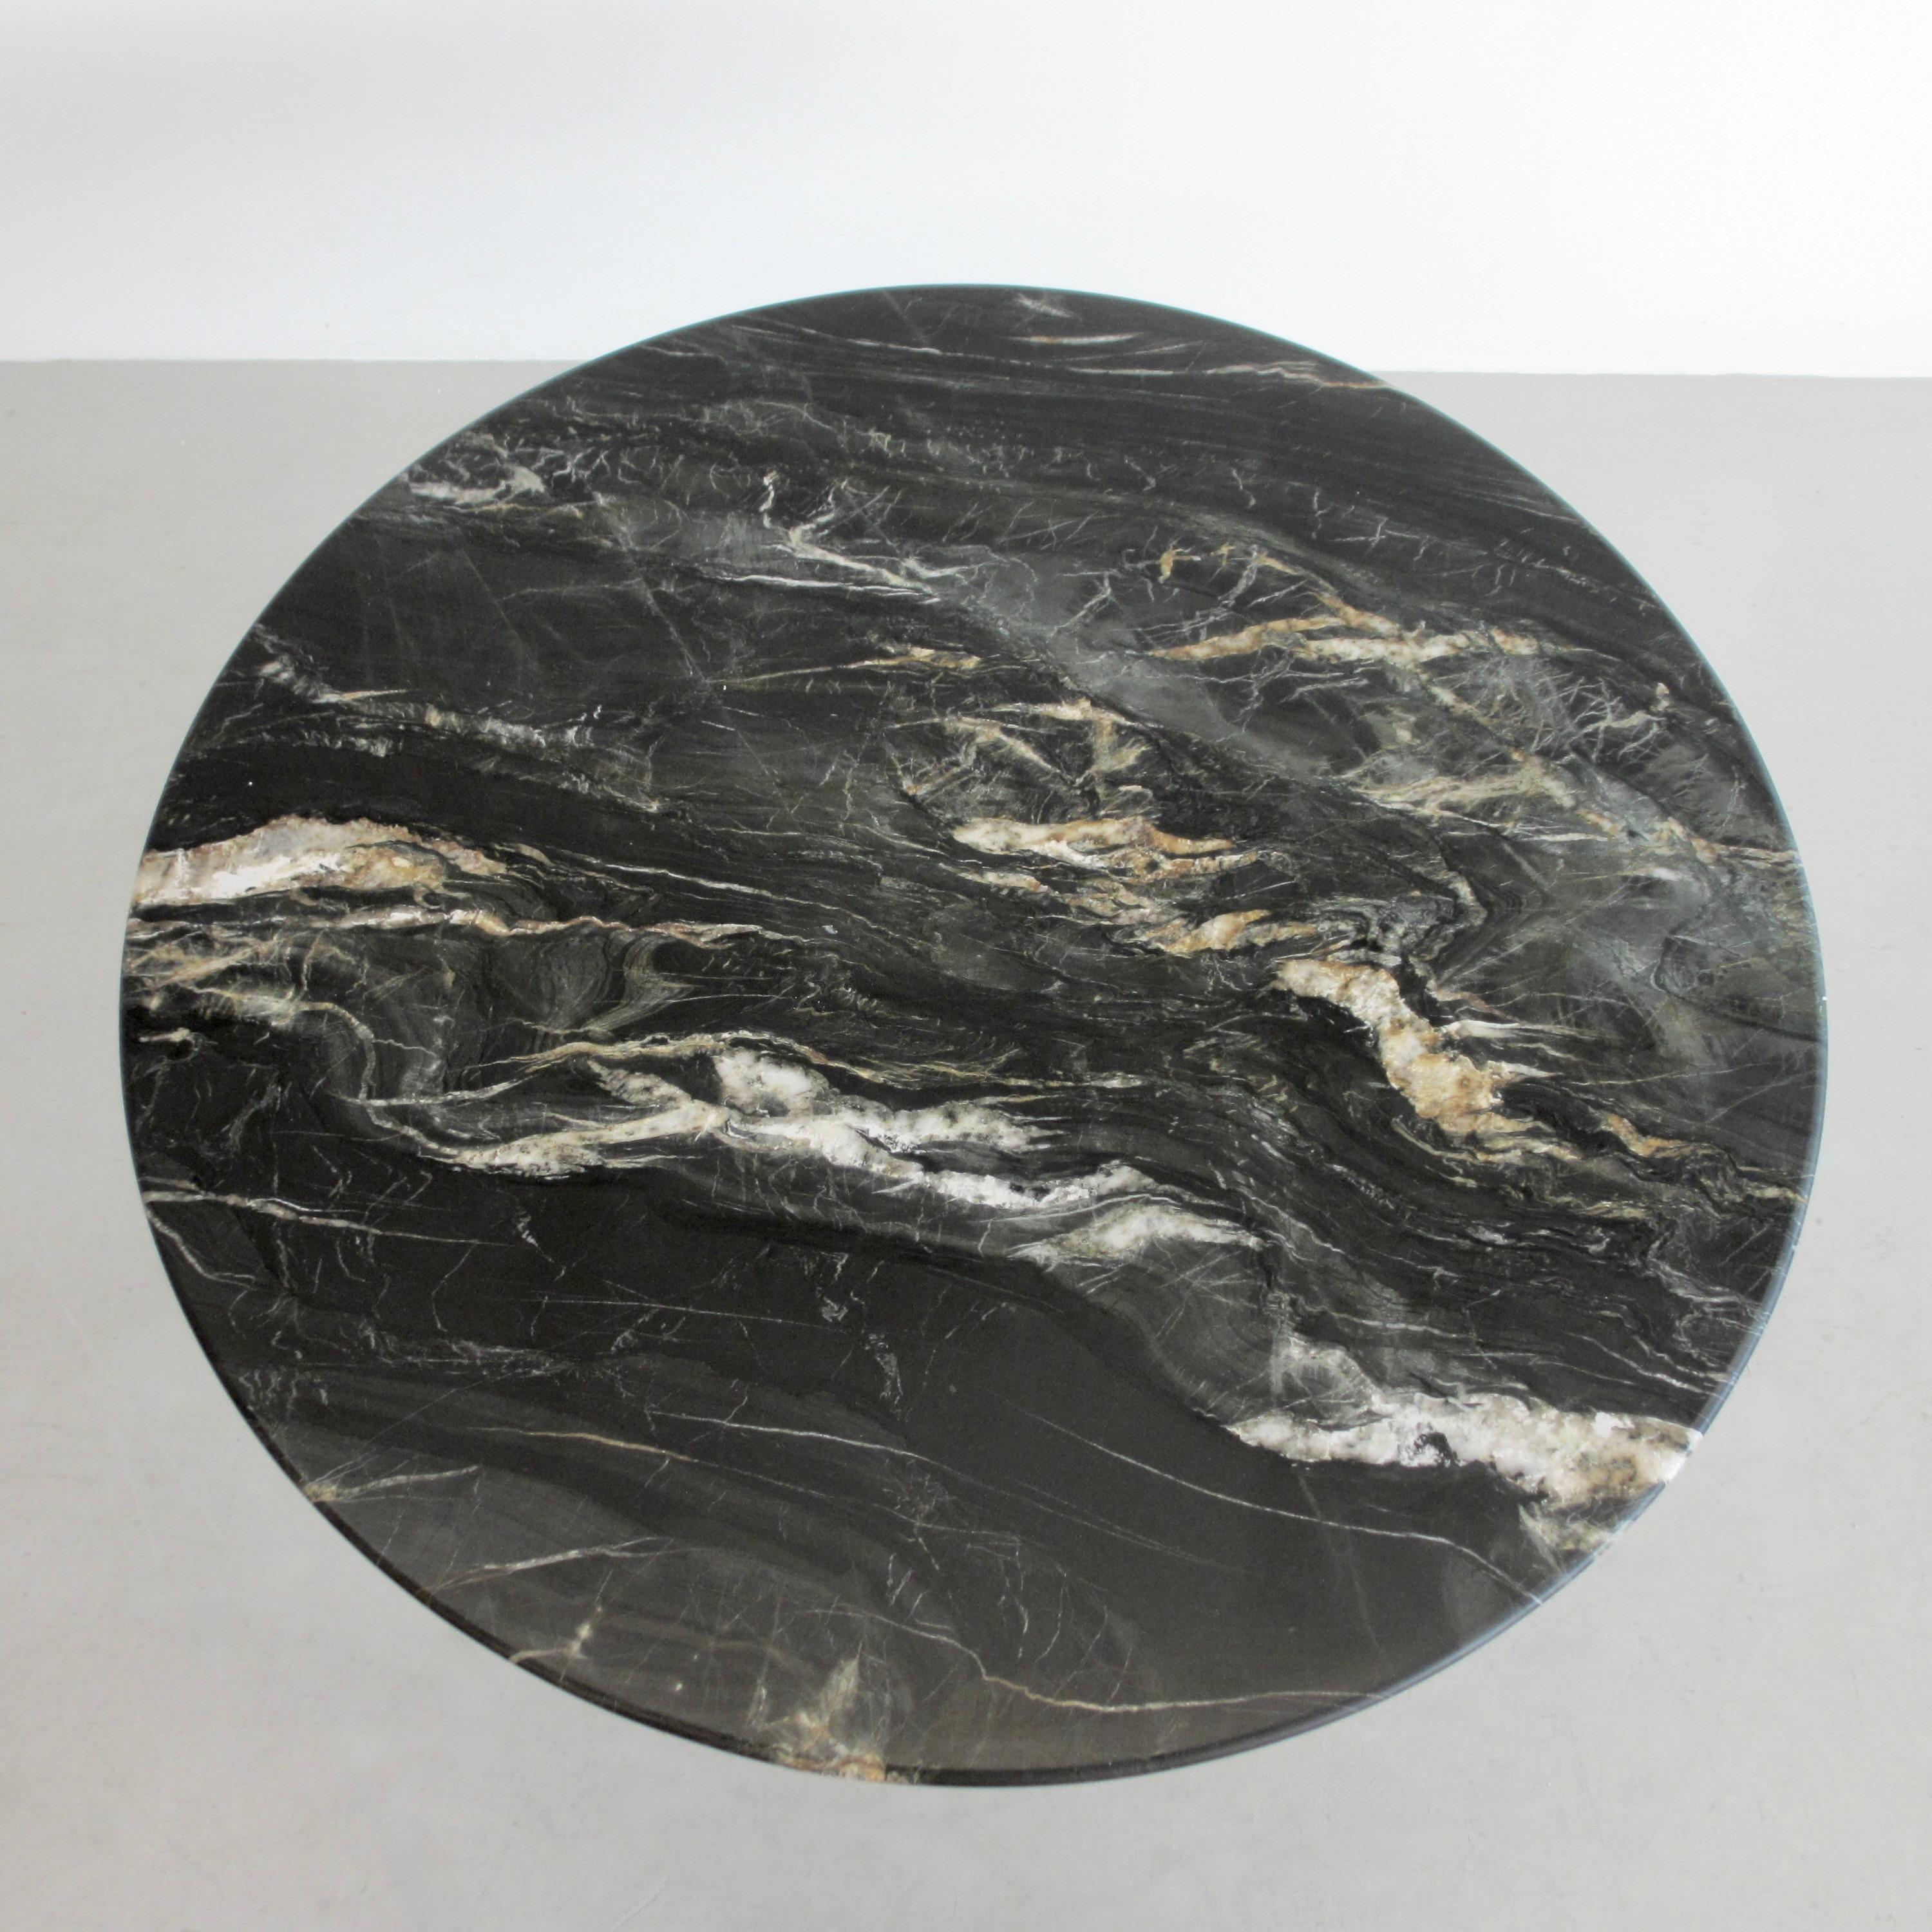 Round Marble Dining Table (T69A) designed by Osvaldo Borsani and Eugenio Gerli in 1963/64. Produced by TECNO.

Brushed metal base with the inner sides finished in matt black enamel. Matt black 'Belvedere' marble top with veins in different colours